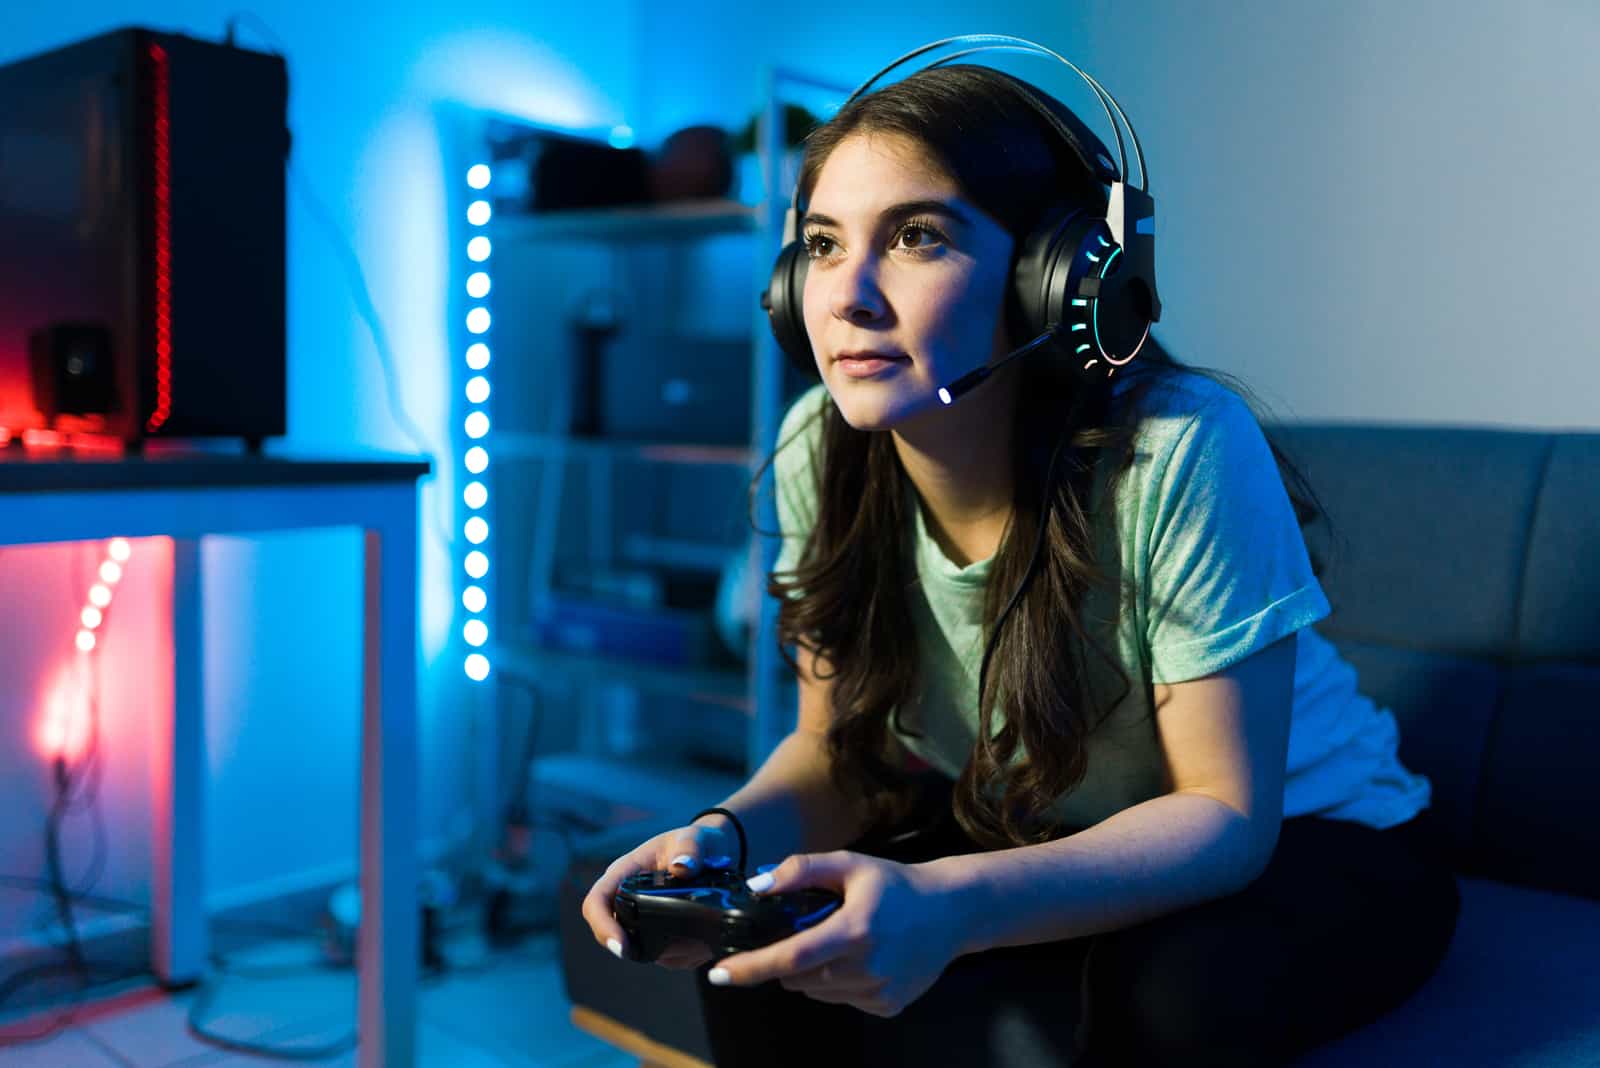 a woman sitting on a couch with headphones on and playing video games